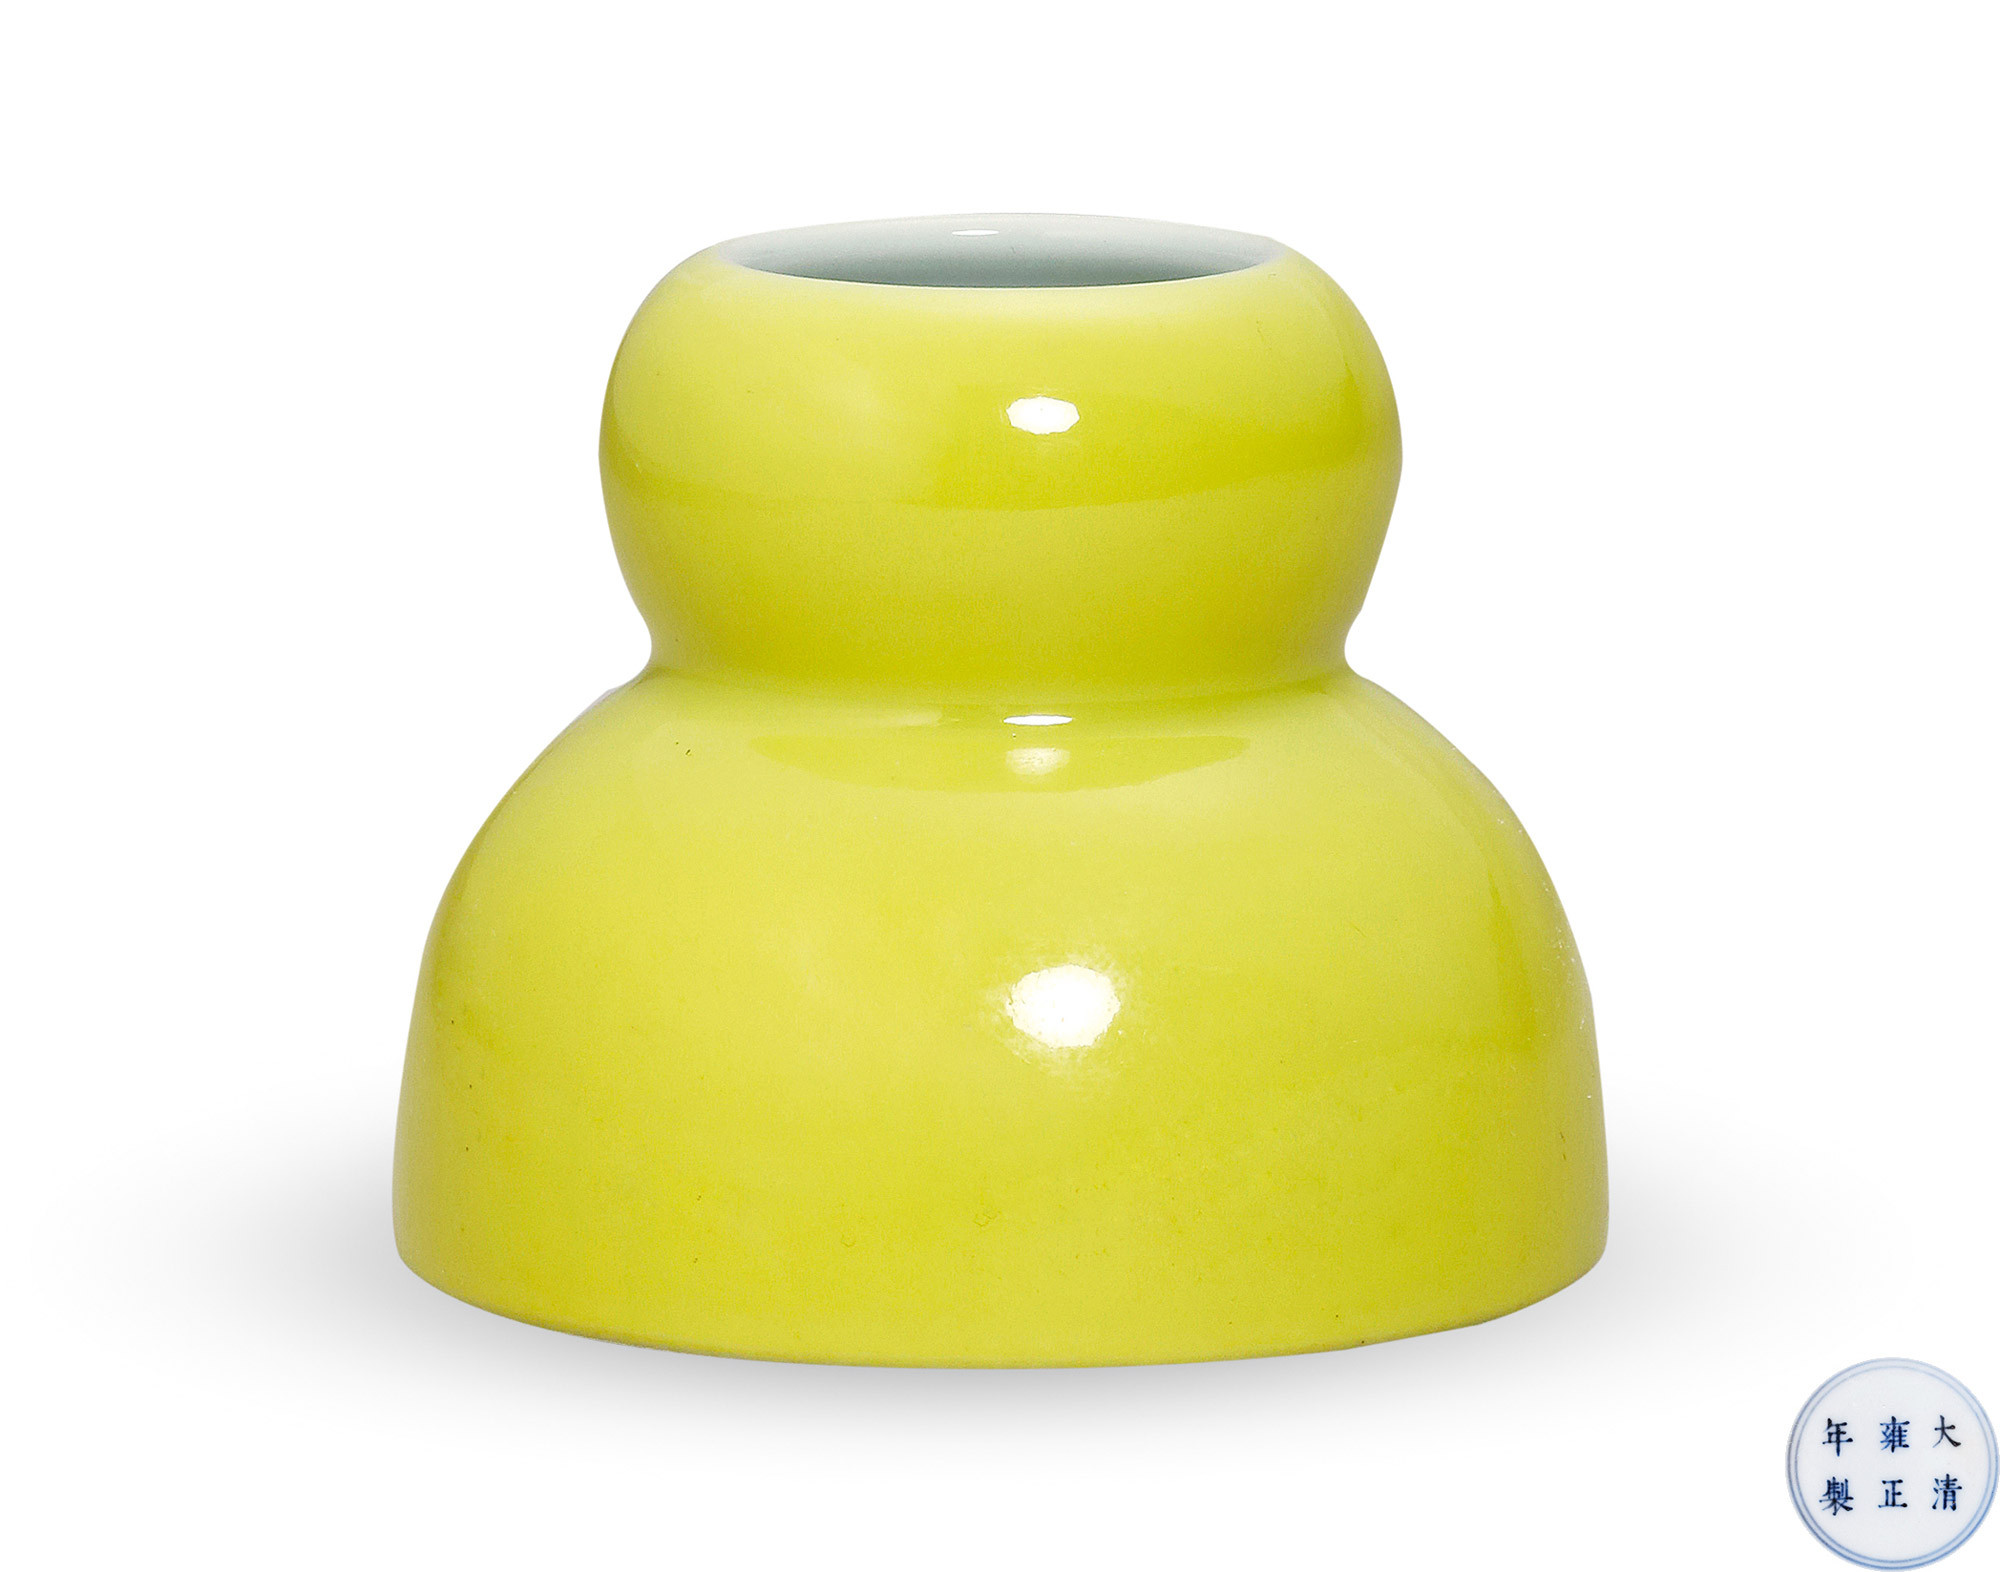 A RARE Yellow Glazed Double-Gourd SHAPED Waterpot